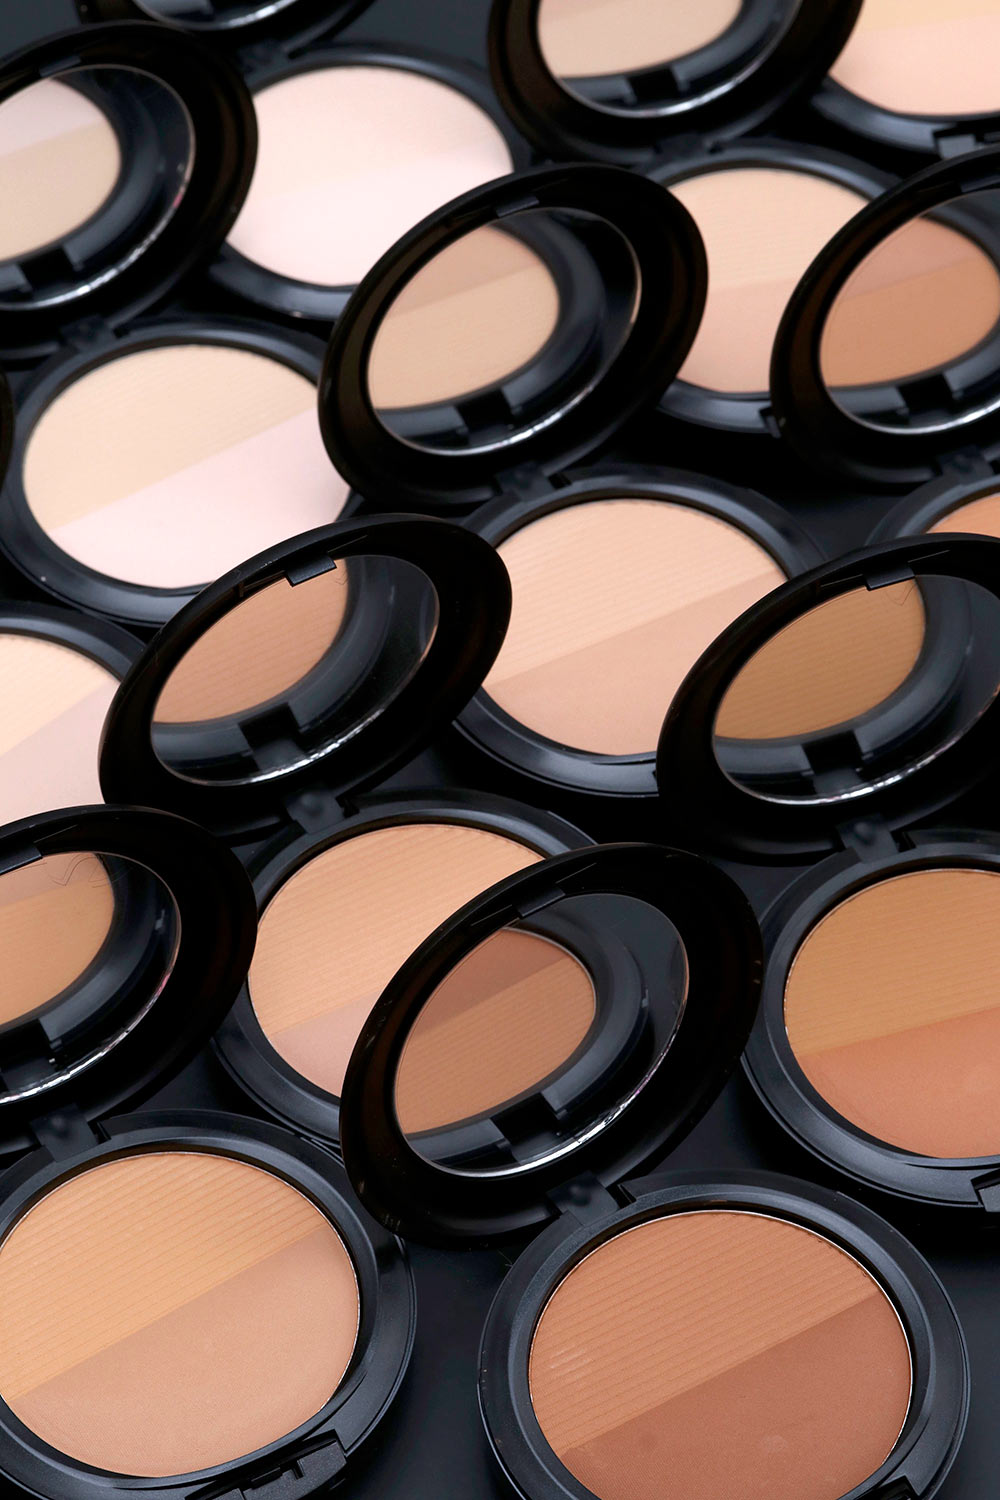 8 Things To Know About New Mac Studio Waterweight Powder Pressed